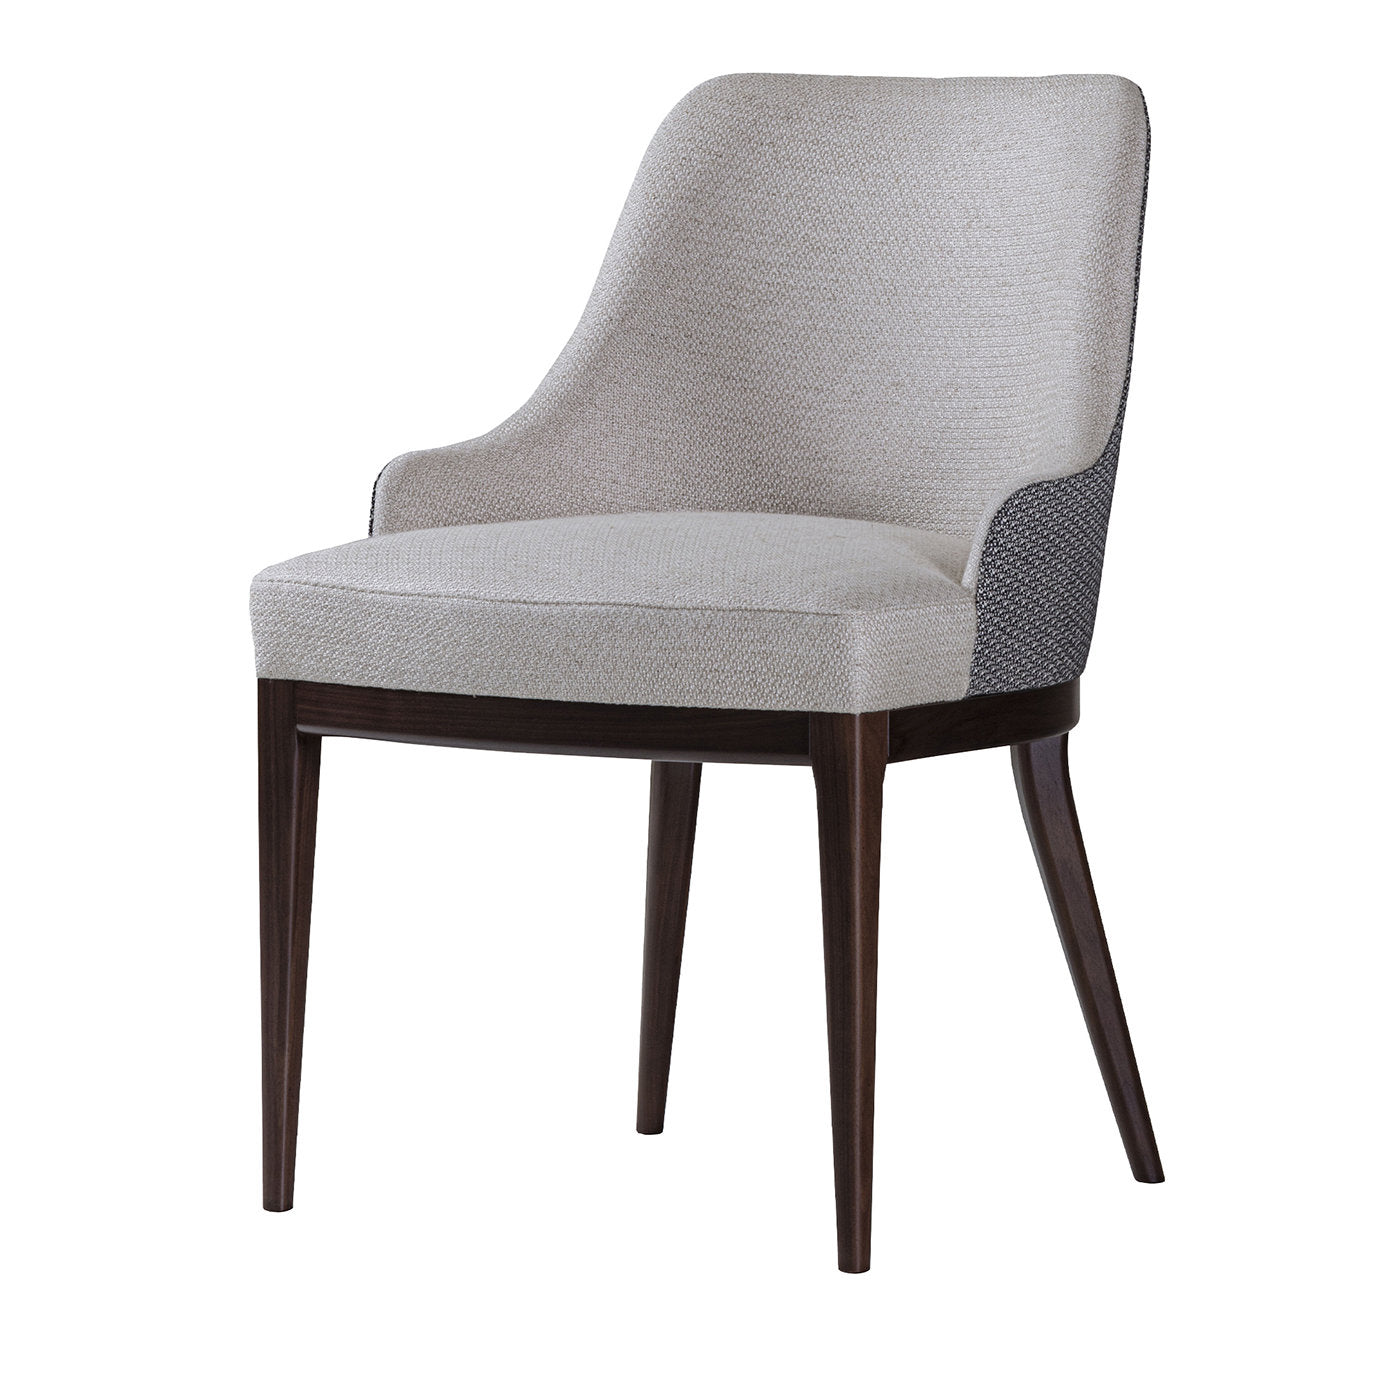 Adele Dining armchair - Main view